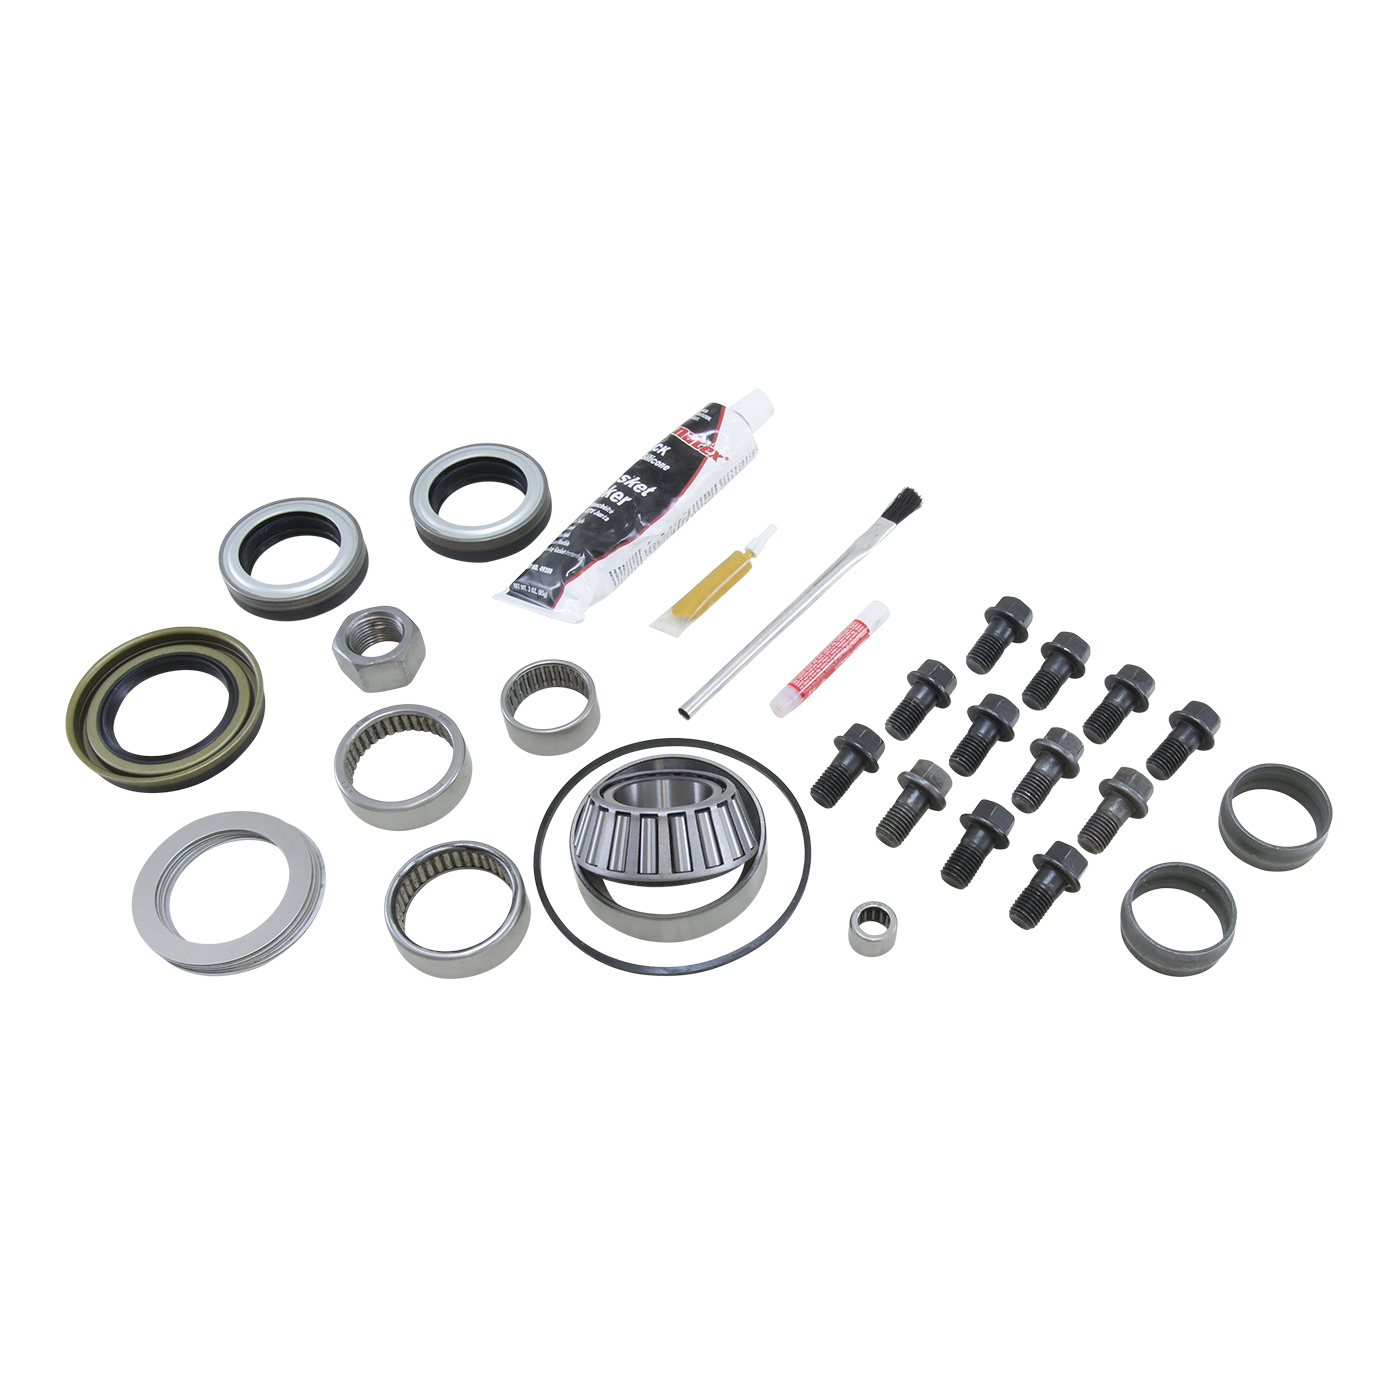 USA Standard 37146 Front Master Overhaul Kit, For The 2011 & Up GM 9.25 in. Ifs